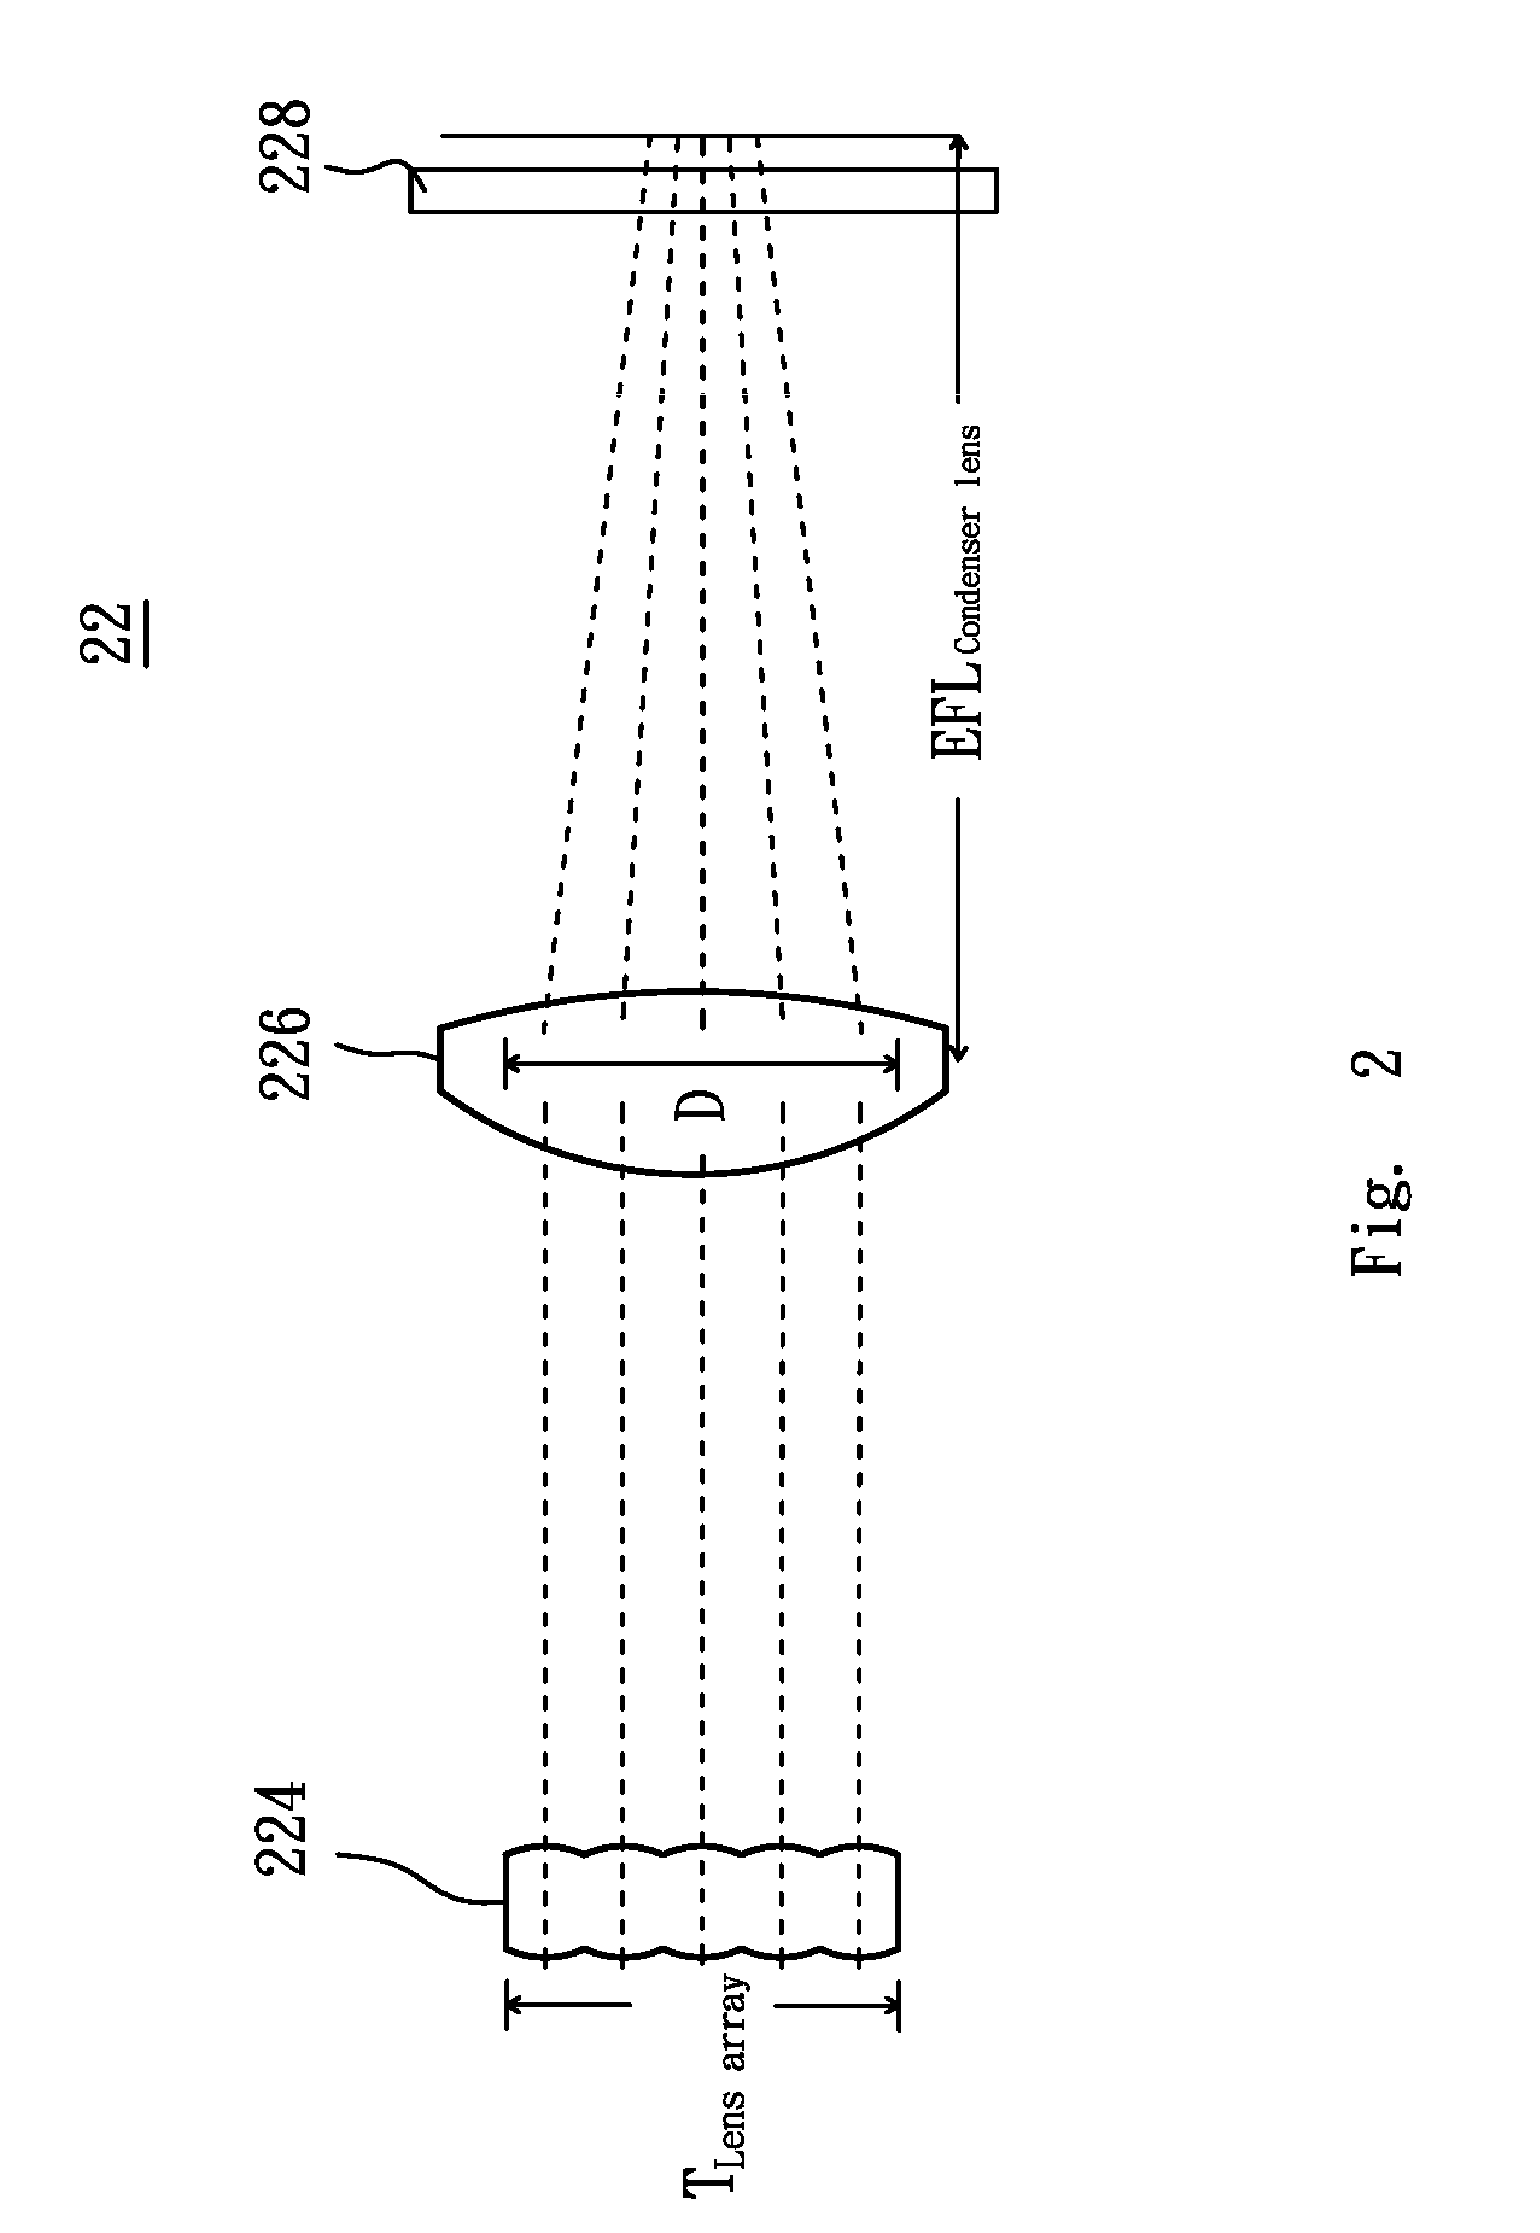 Compact projector with high optical performance